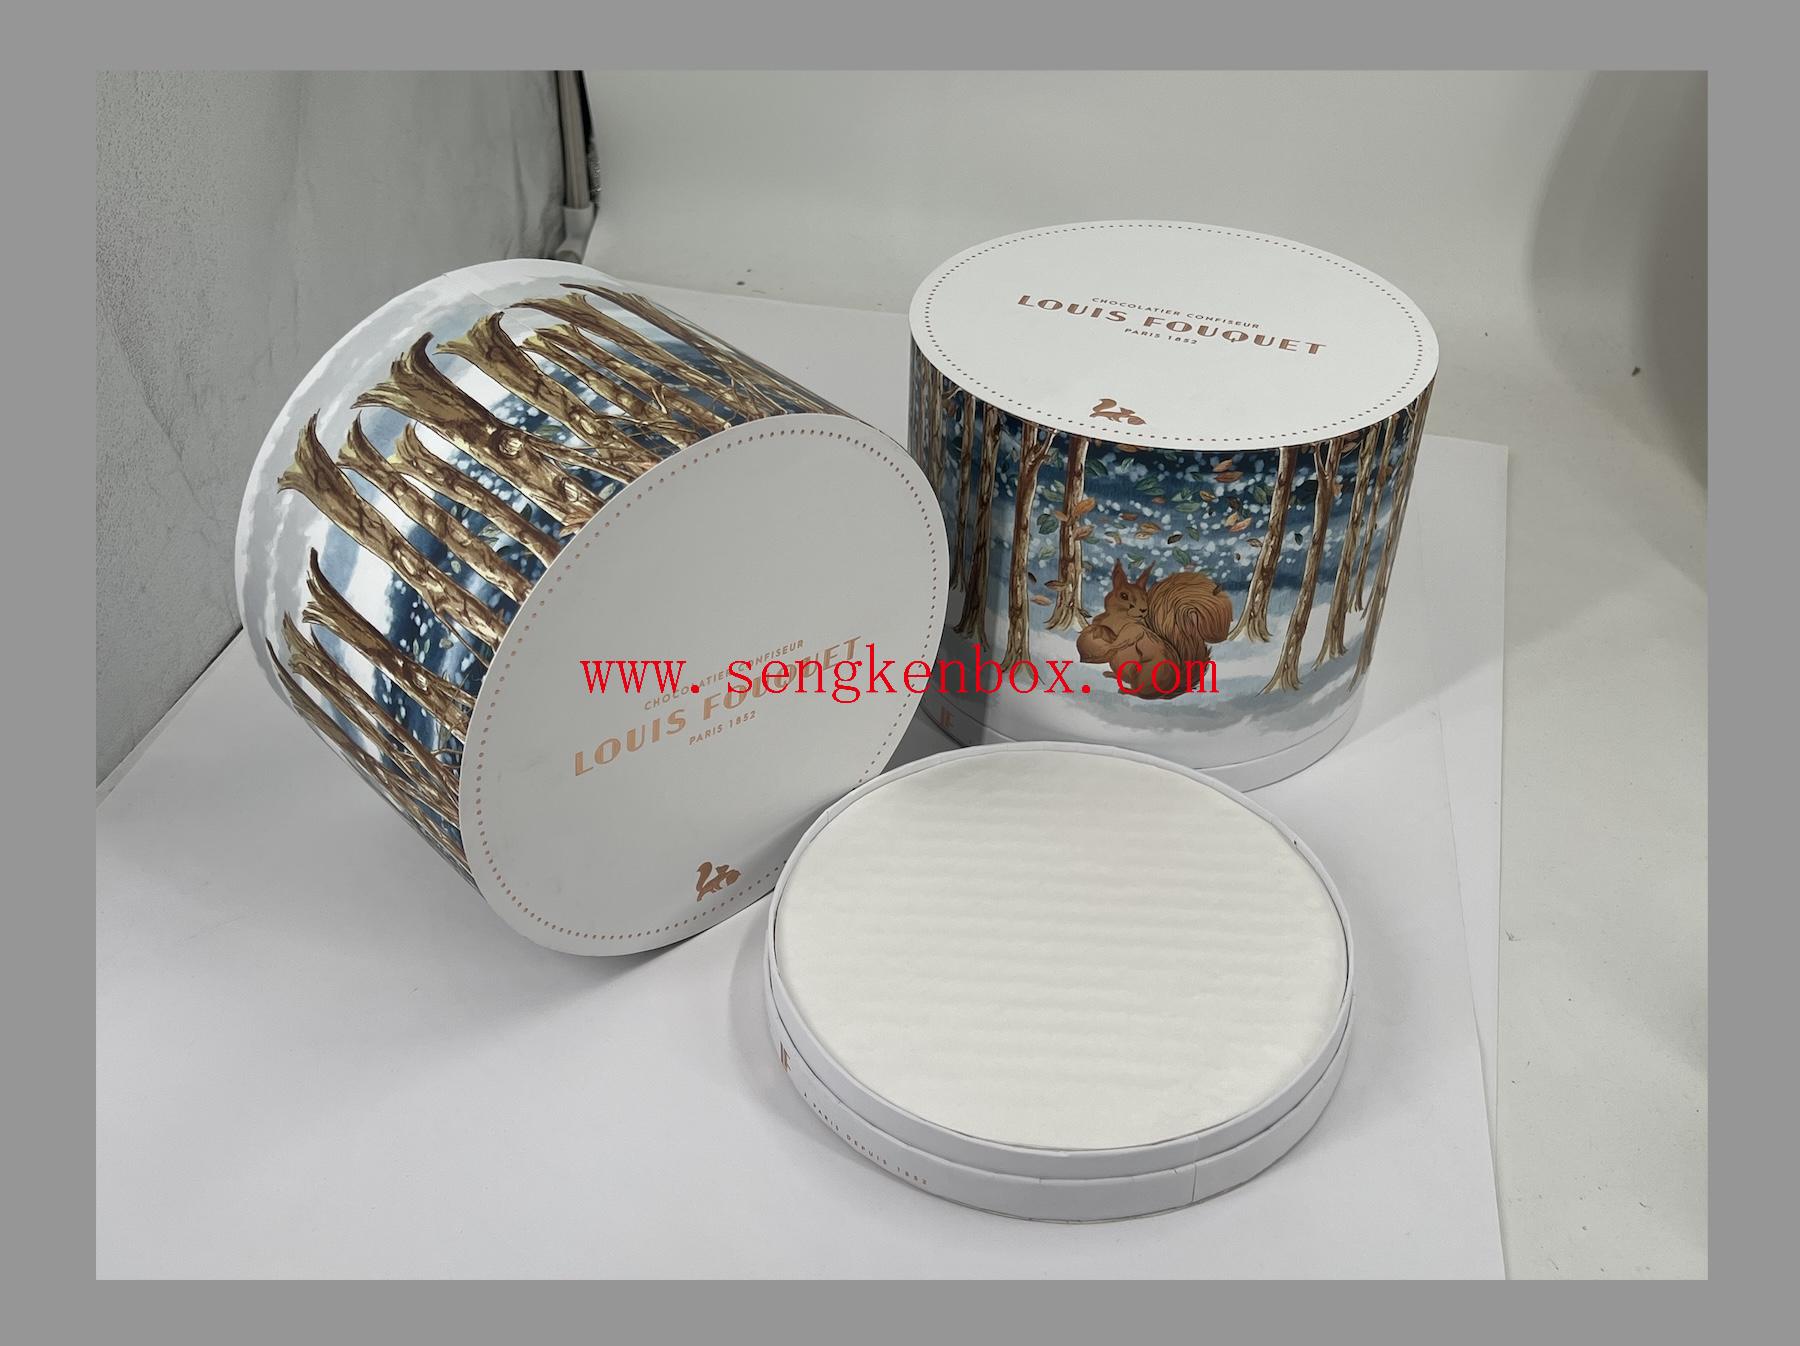 2 Pieces Round Chocolate Packaging Gift Box